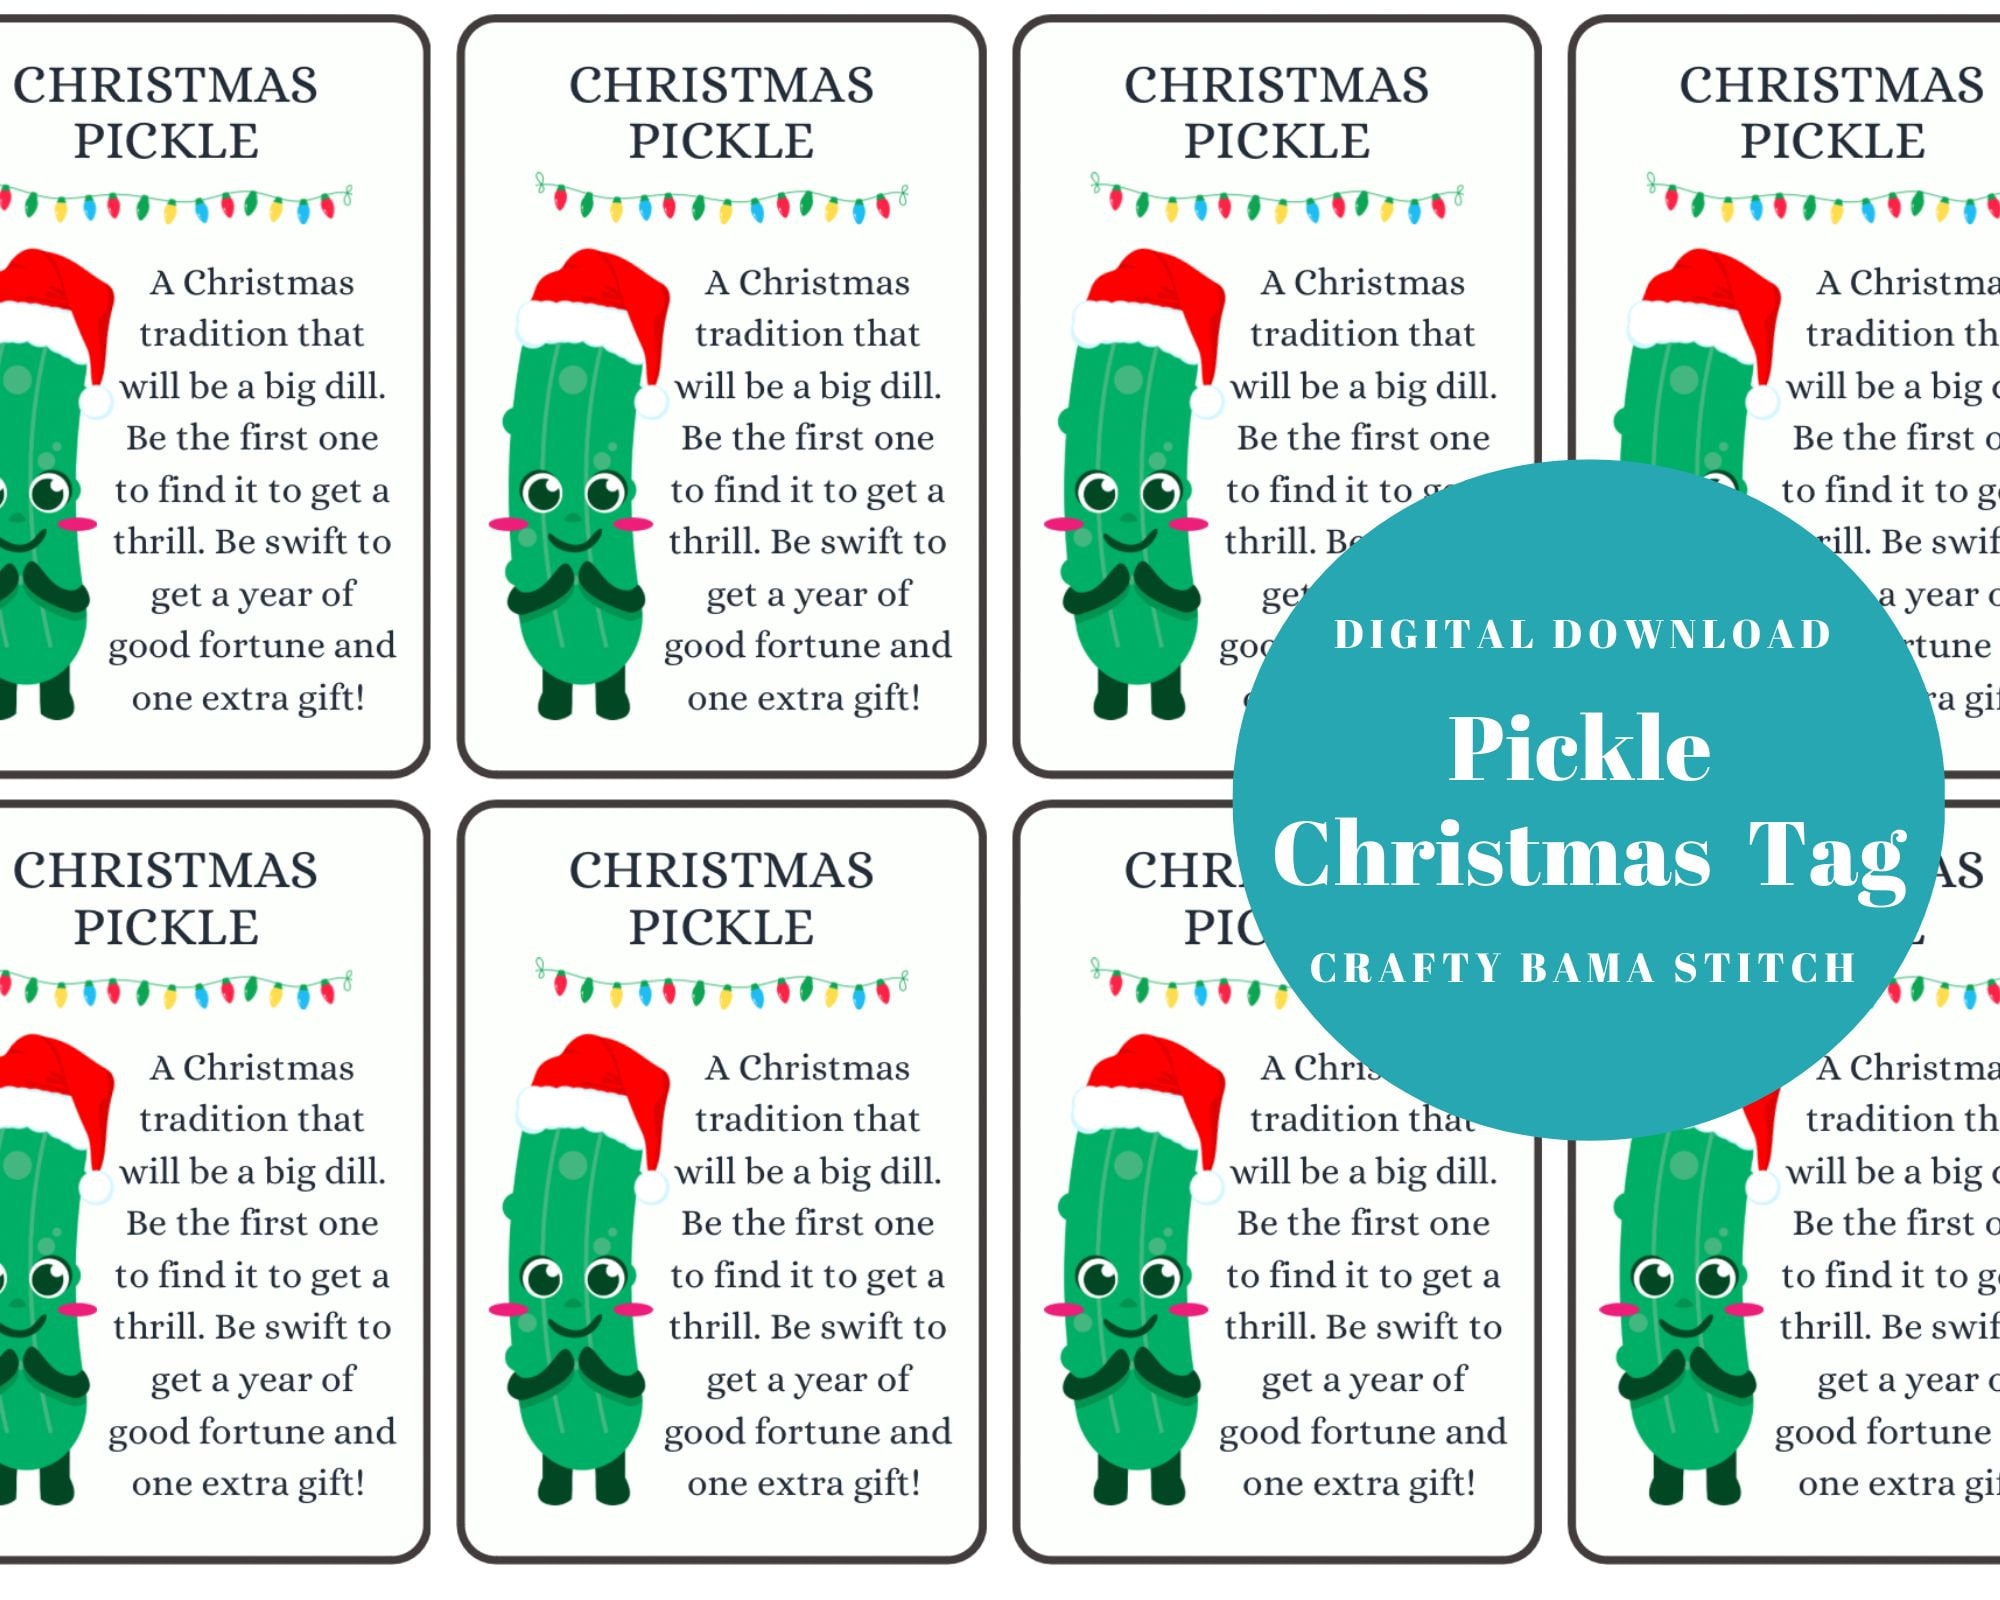 Peas on Earth Holiday Gift Tags – A Jar of Pickles